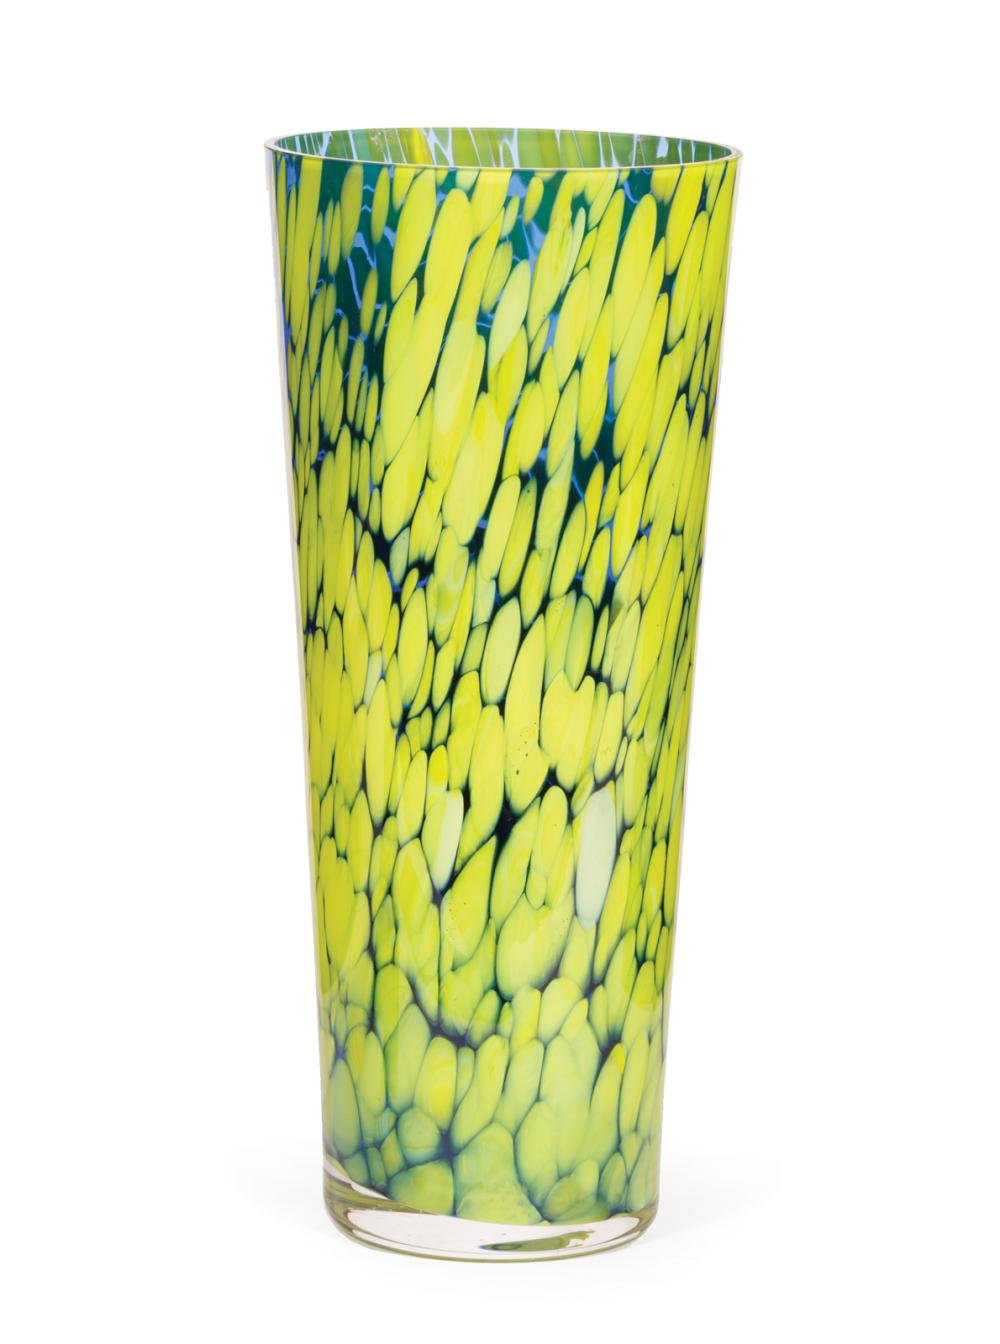 ART GLASS YELLOW AND BLUE VASEArt